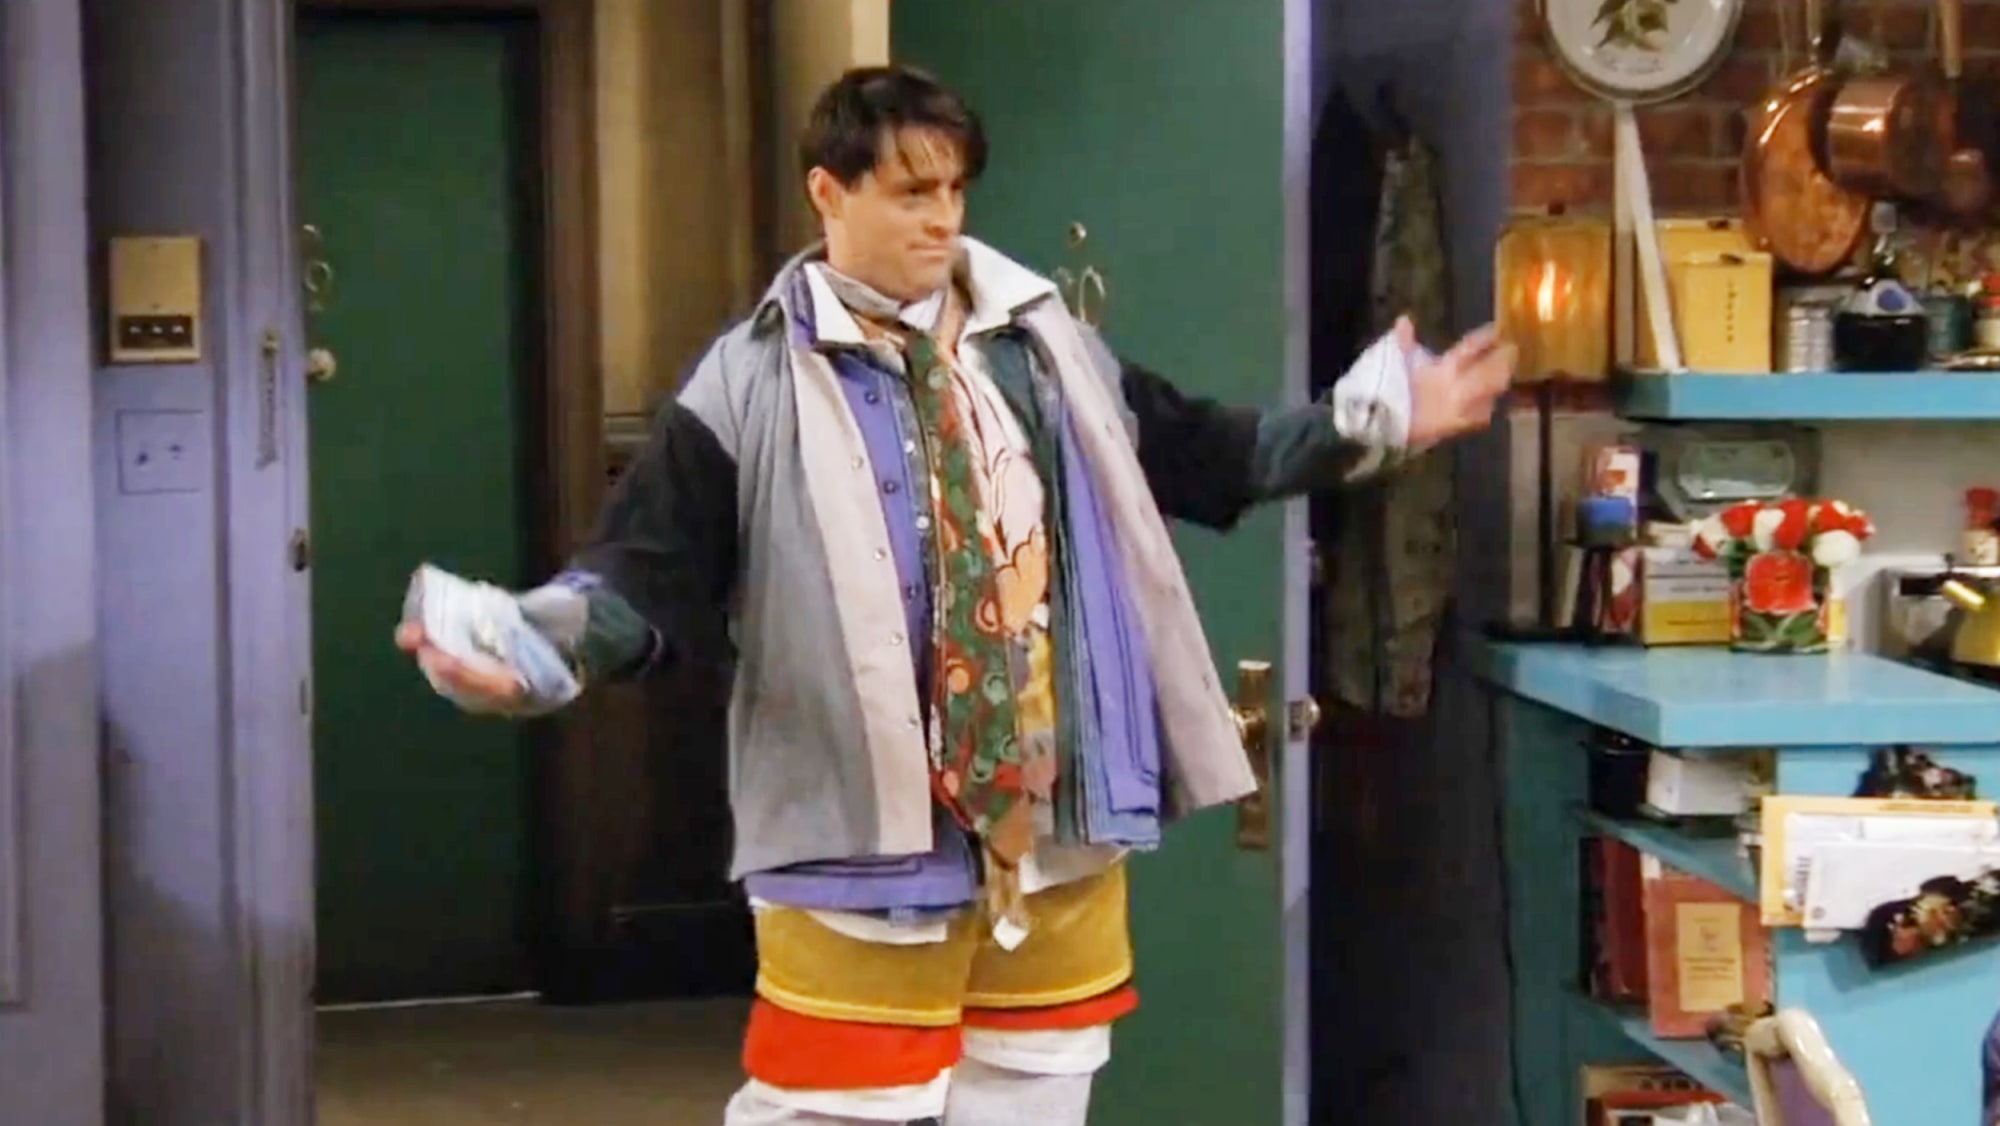 joey-chandler-clothes-today-160810-tease-02_f30b2f607382b41257e5142601094a88.fit-2000w.jpg